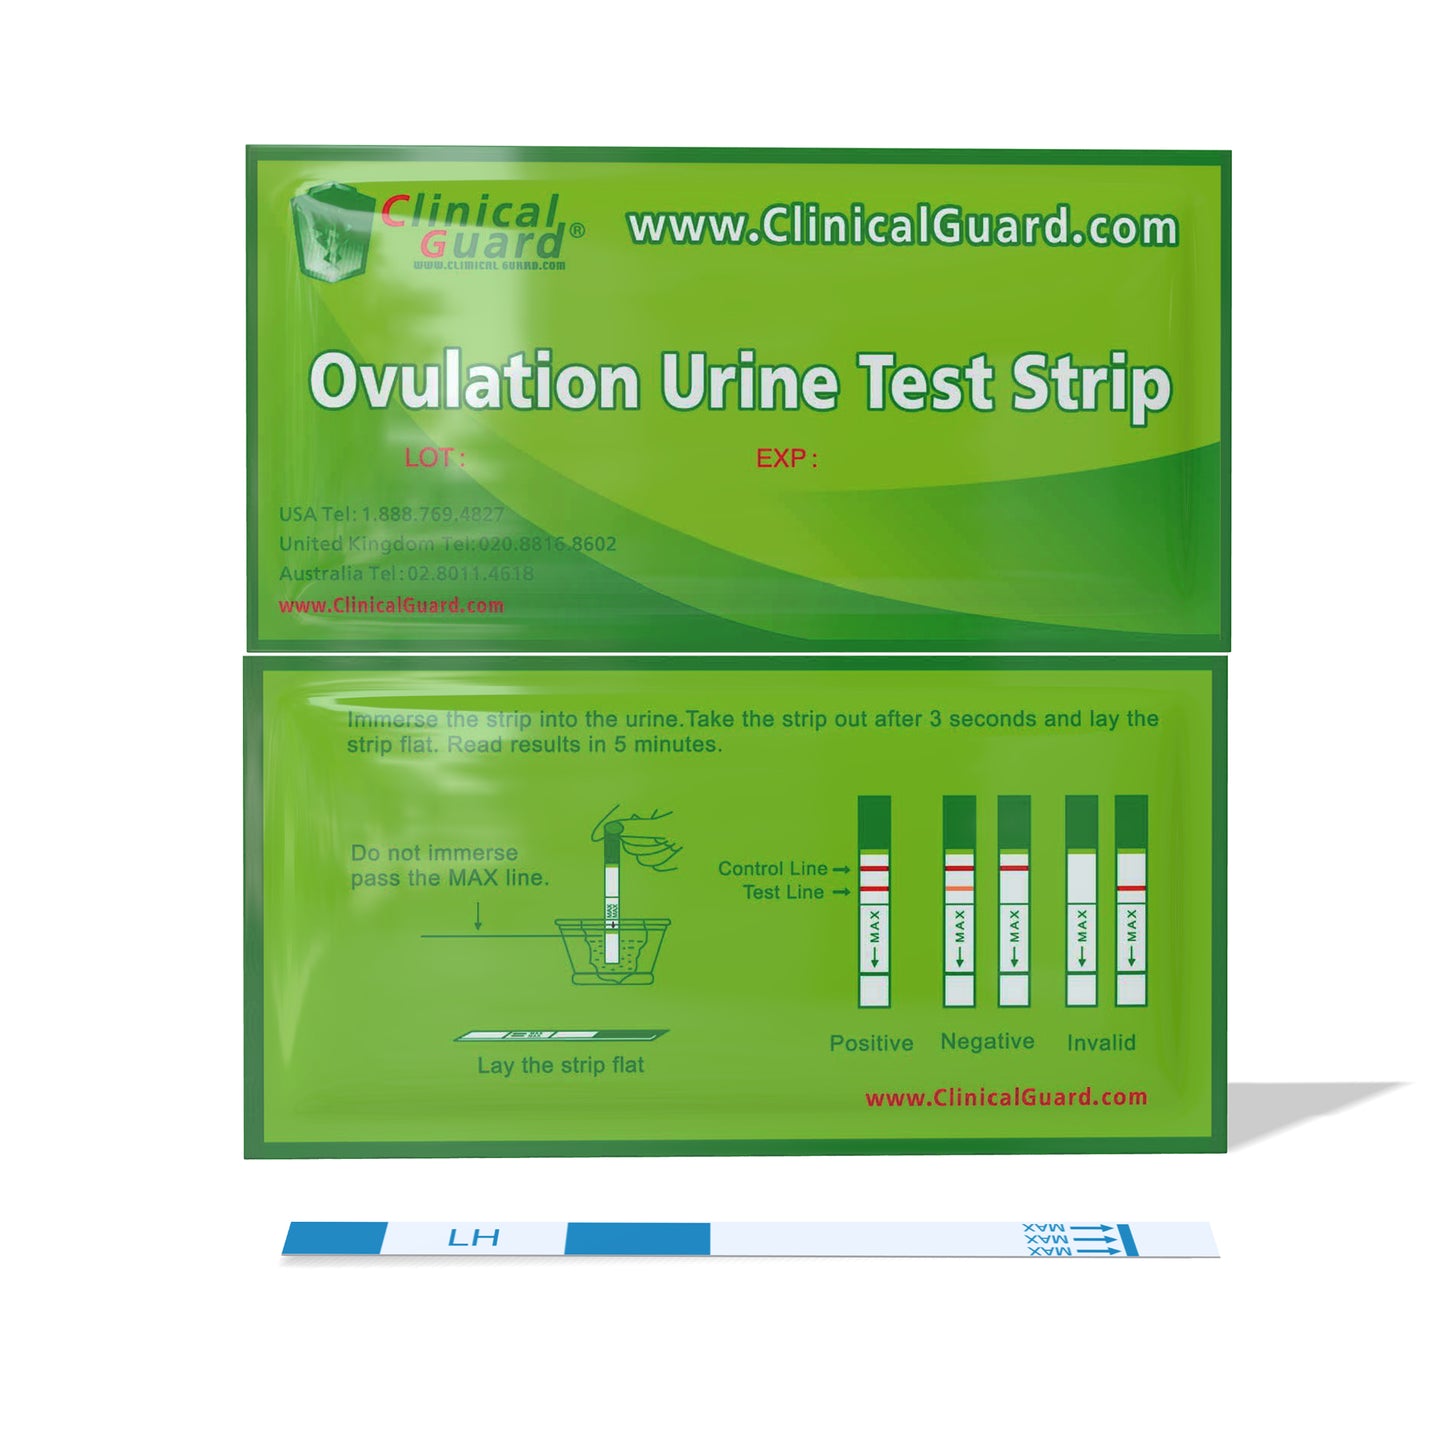 Clinical_Guard_Ovulation_Urine_Test_Strips_